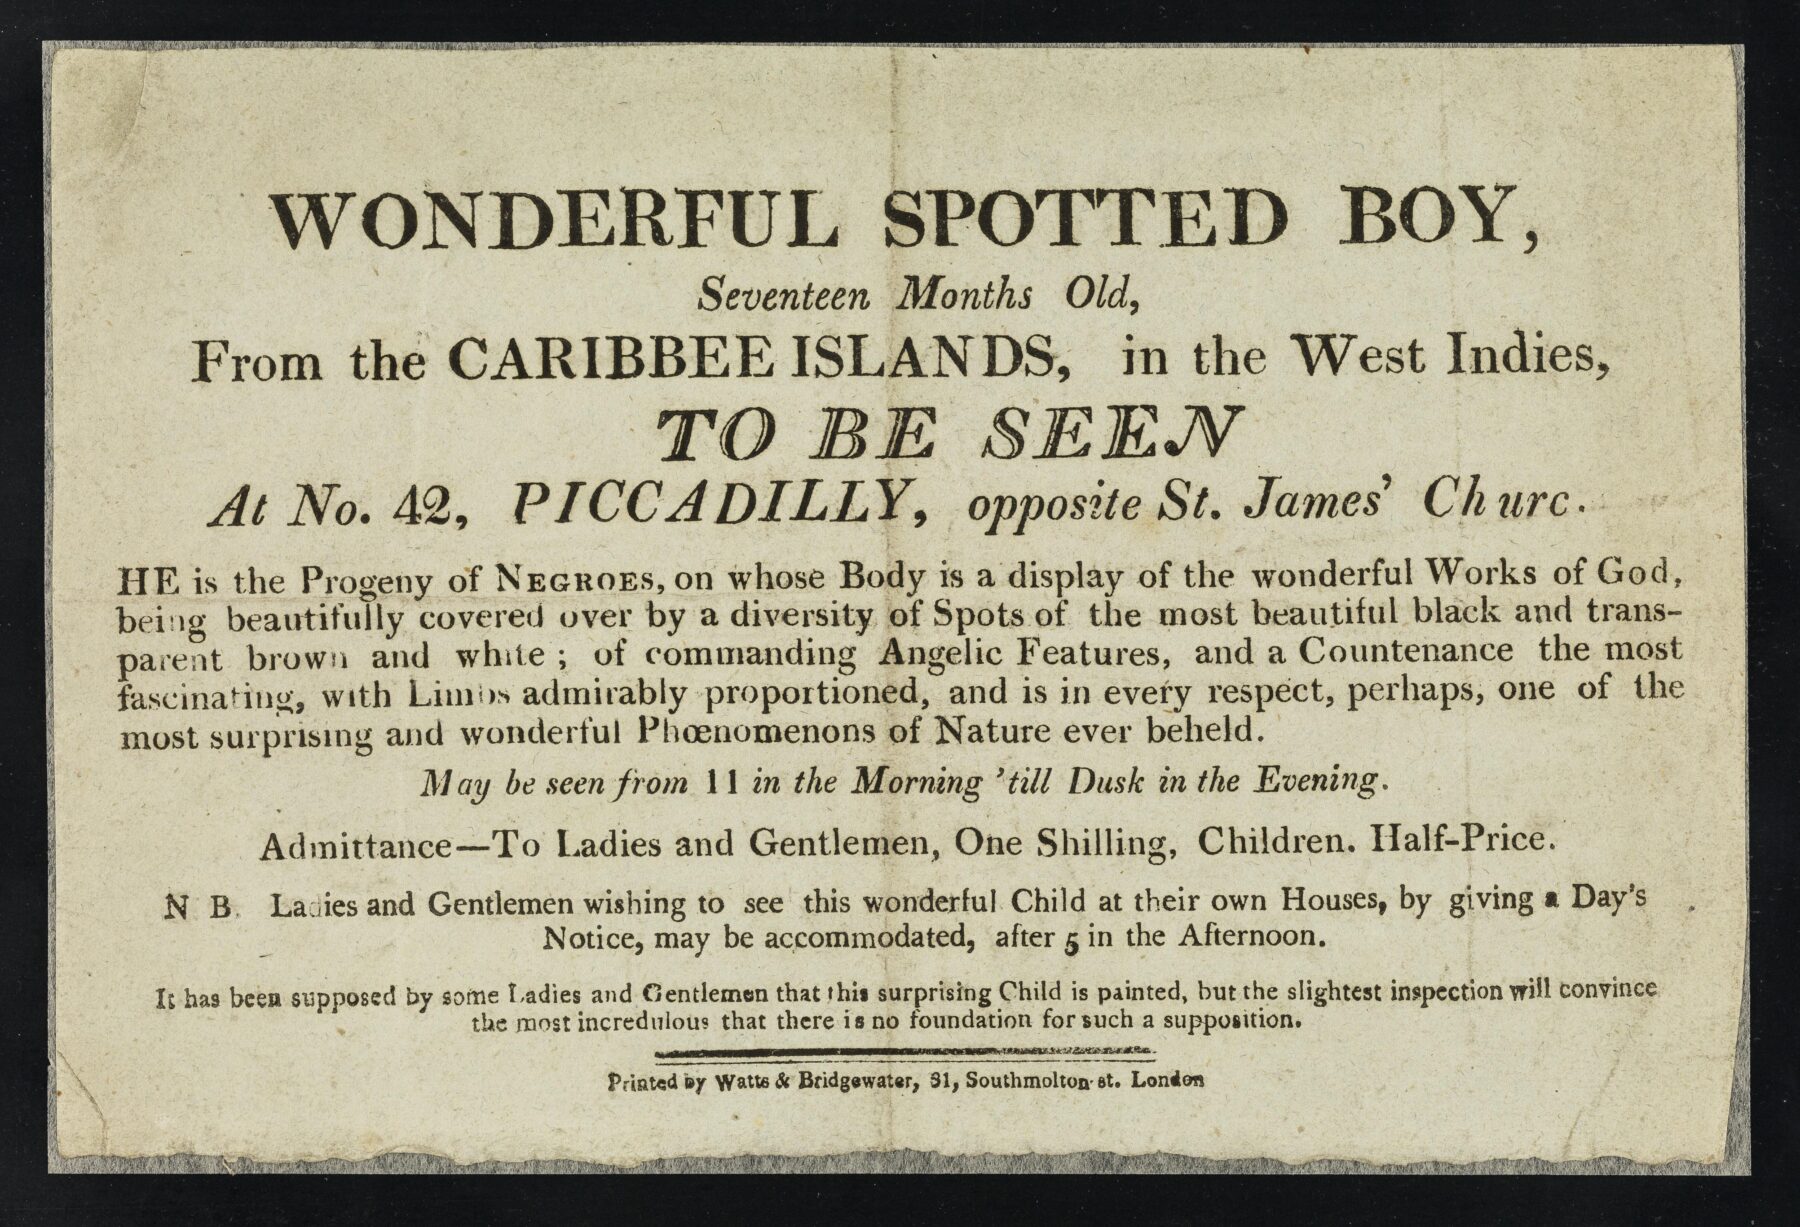 No_6_Wondeful Spotted Boy 42 Piccadilly credit Wellcome Collection